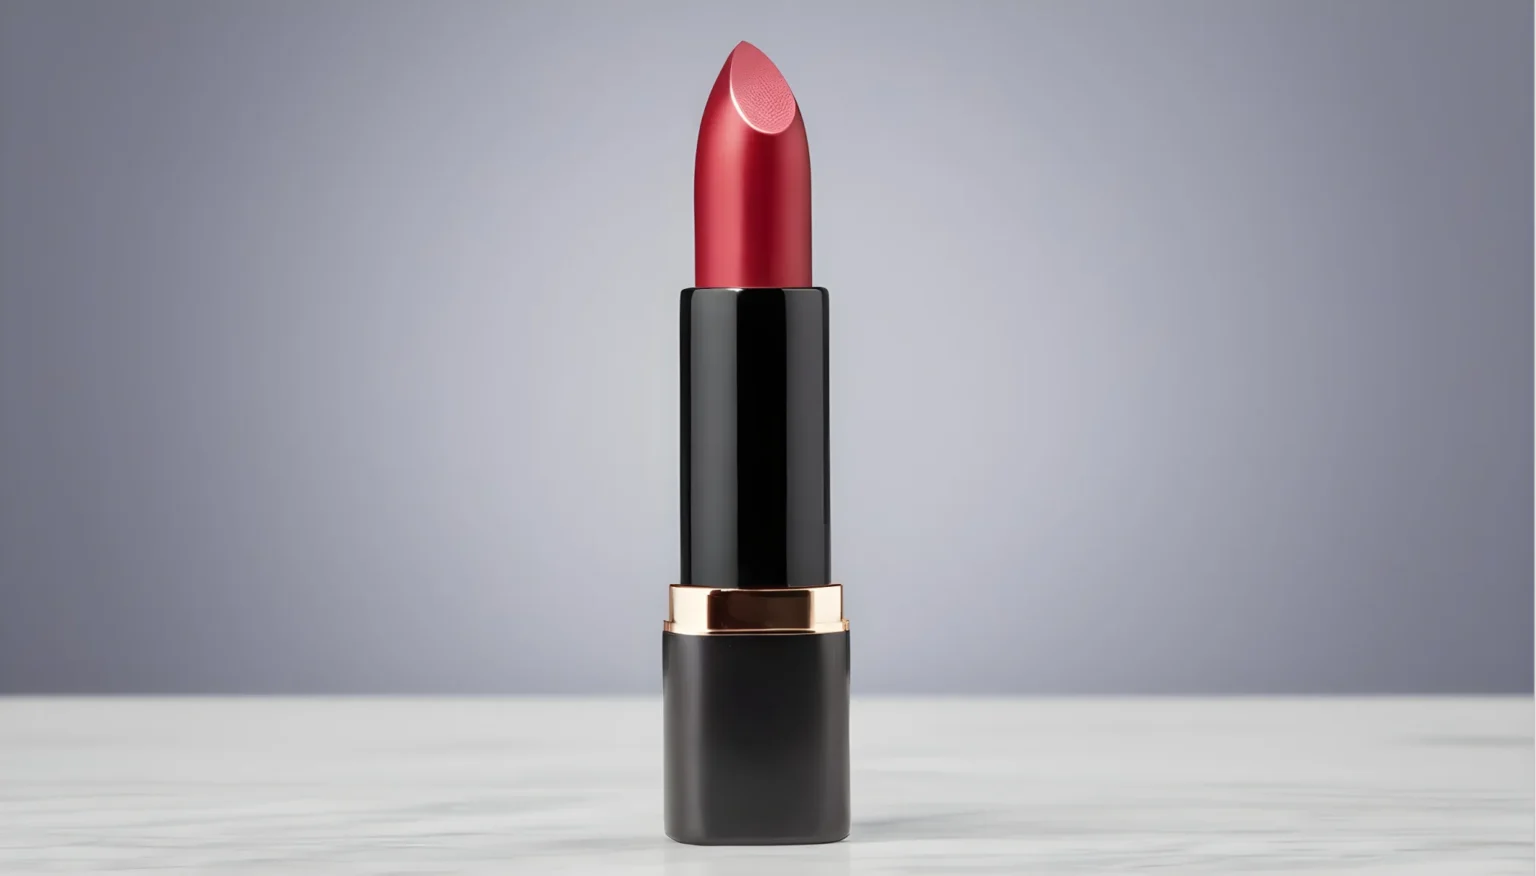 Top 10 lipstick product photography ideas